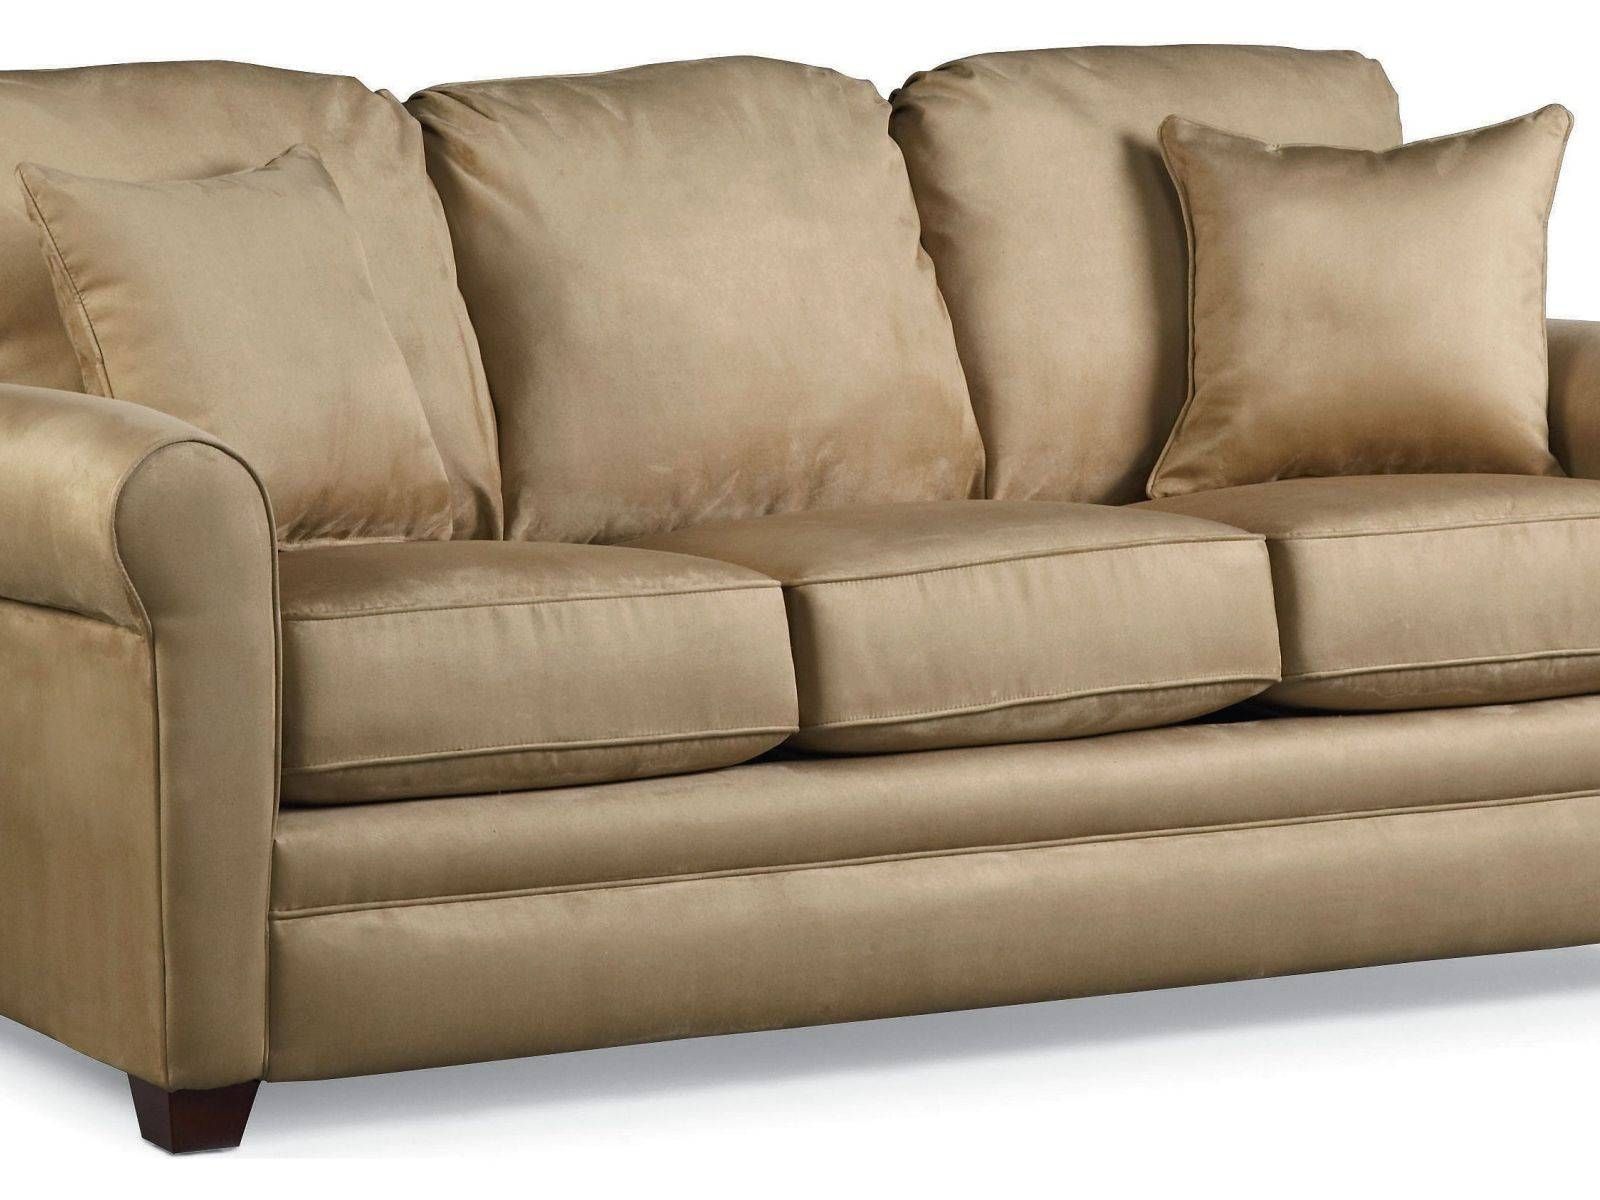 ☆▻ Sofa : 4 Fabulous Sofa Sleepers Queen Alluring Home Decor In Sofa Sleepers Queen Size (Photo 11 of 30)